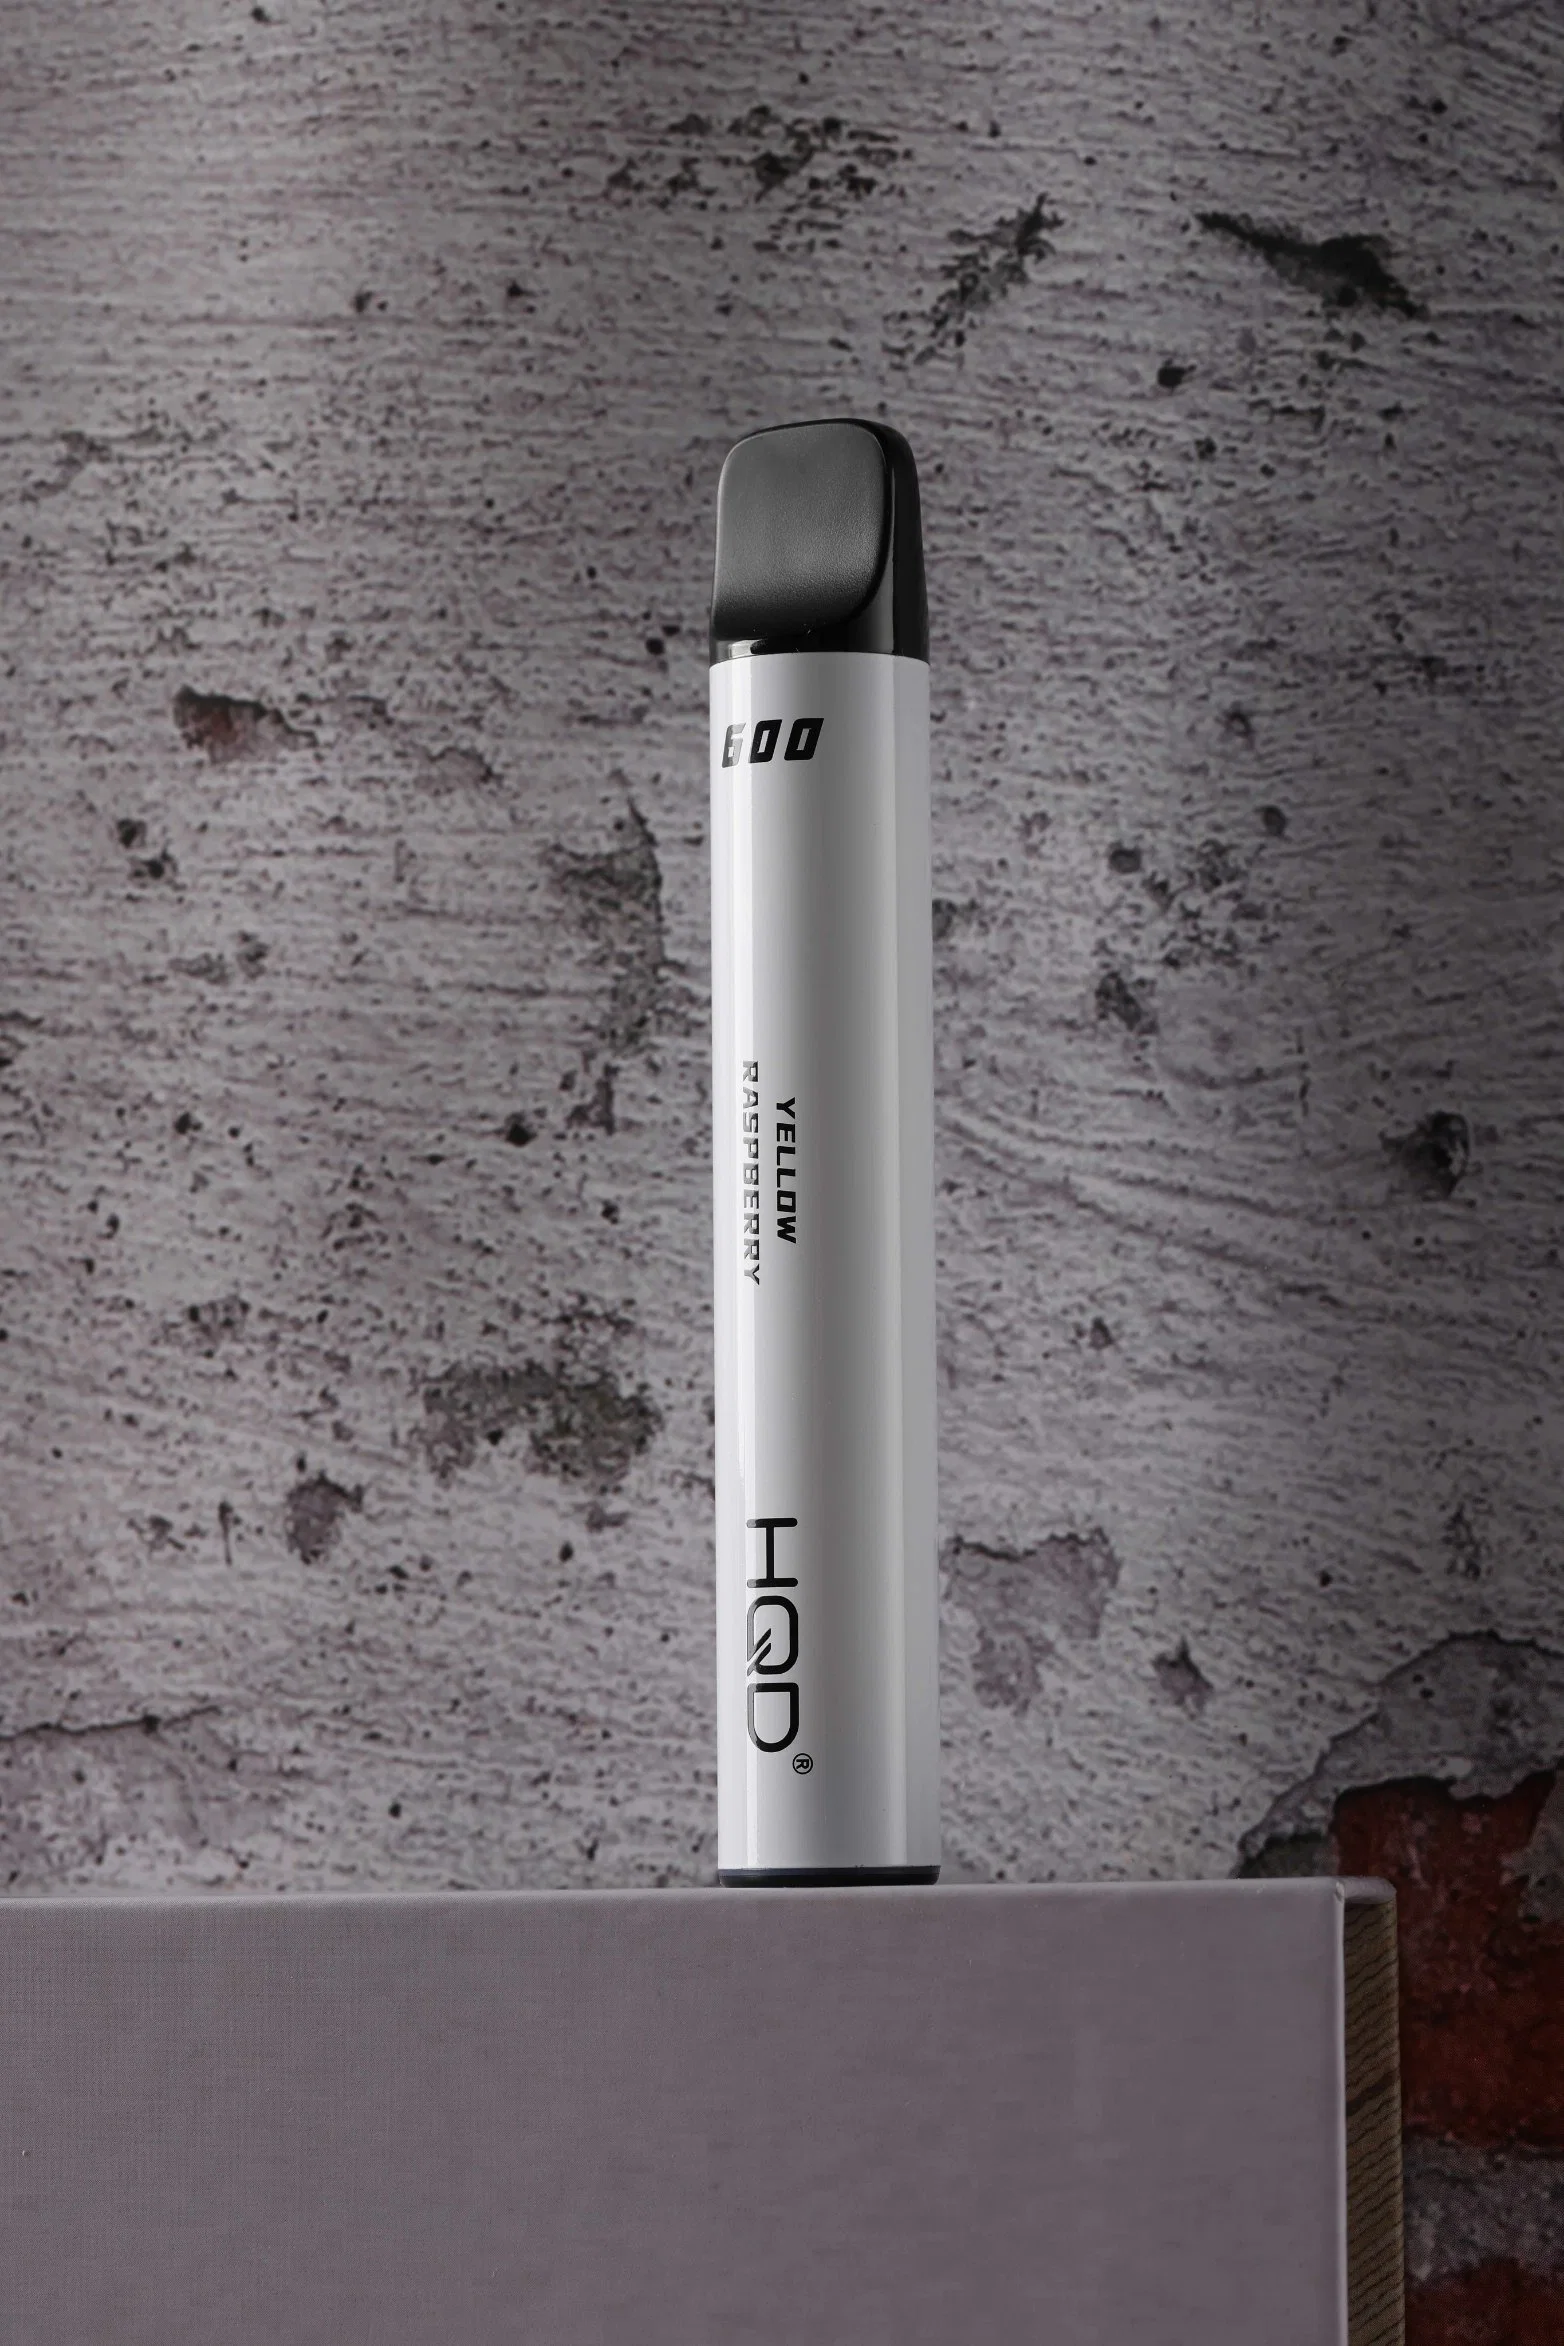 Hqd Disposable/Chargeable Vape Pen Style Esilجاير H097 600 600 نفخة